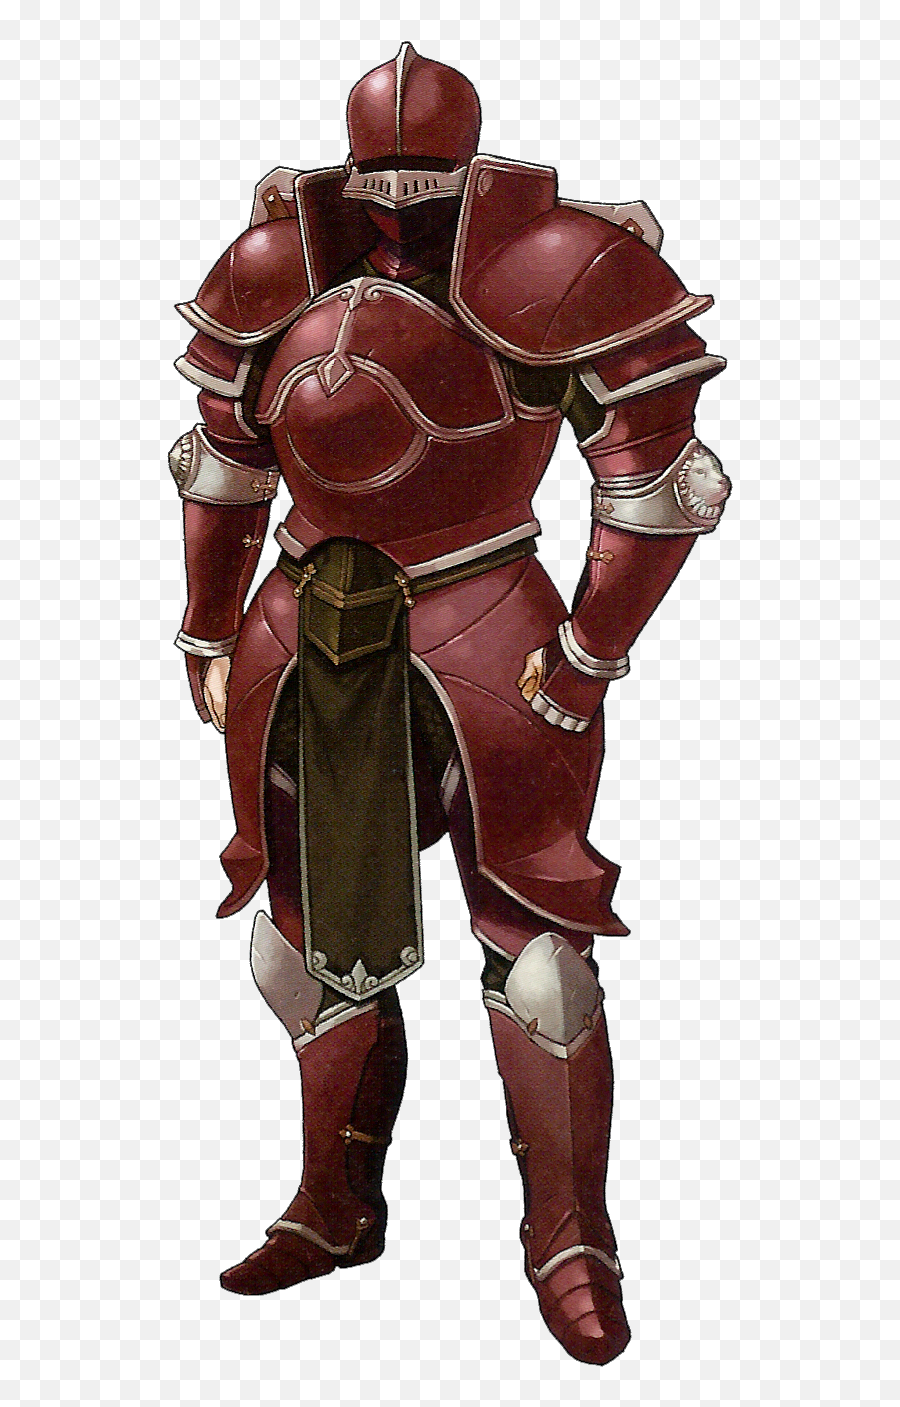 Download Fire Emblem Great Knight Png Image With No - Armor Knight Fire Emblem Emoji,Knight Emoji